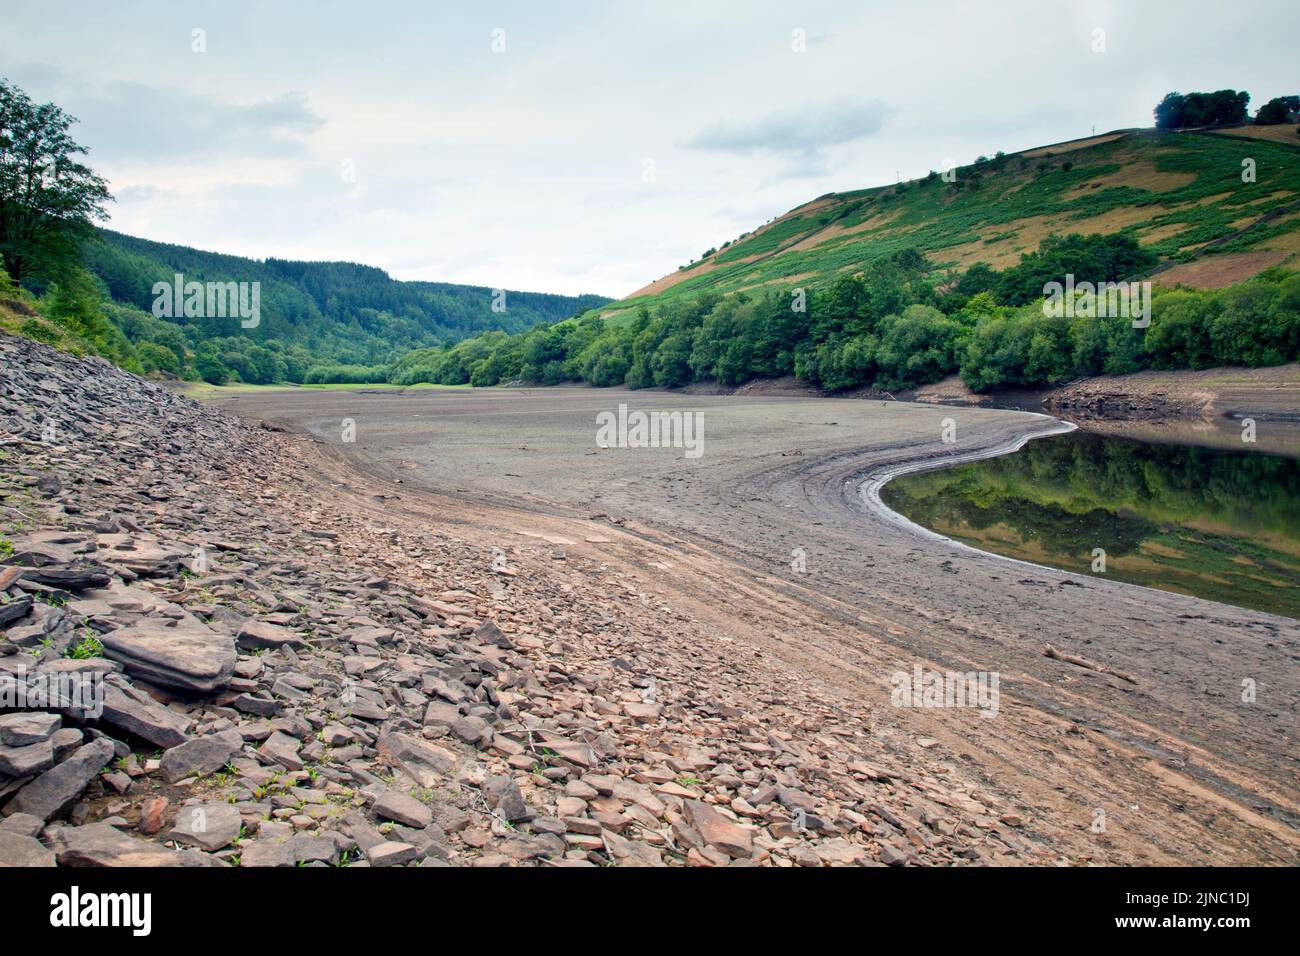 Dry conditions and low level water supplies at Ladybower Reservoir, Peak District, taken during the drought summer 2022 Stock Photo